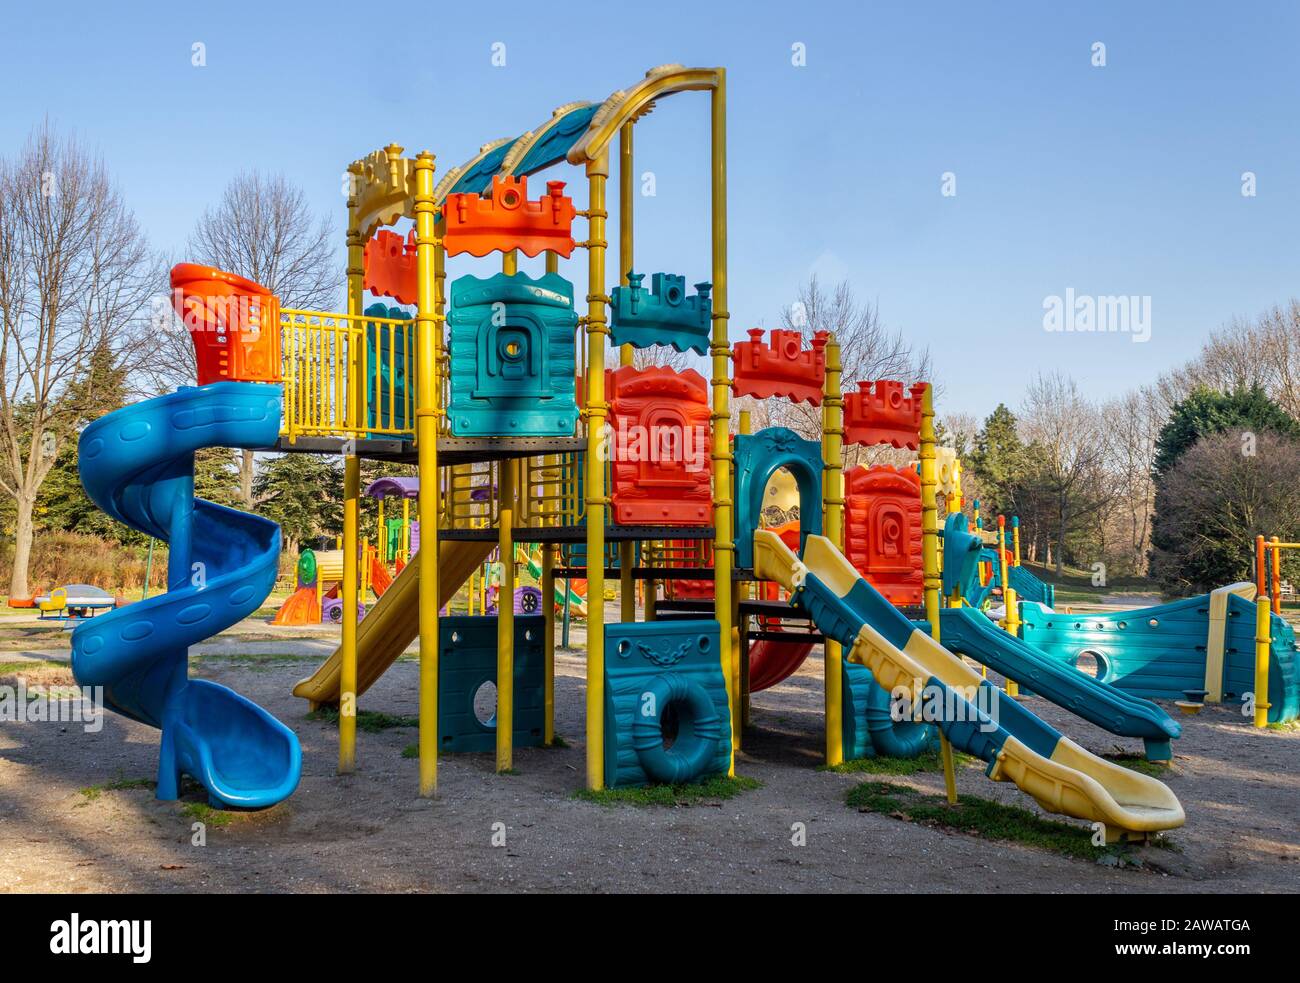 Colorful children playground park. Children's slides and playground made of  plastic material Stock Photo - Alamy